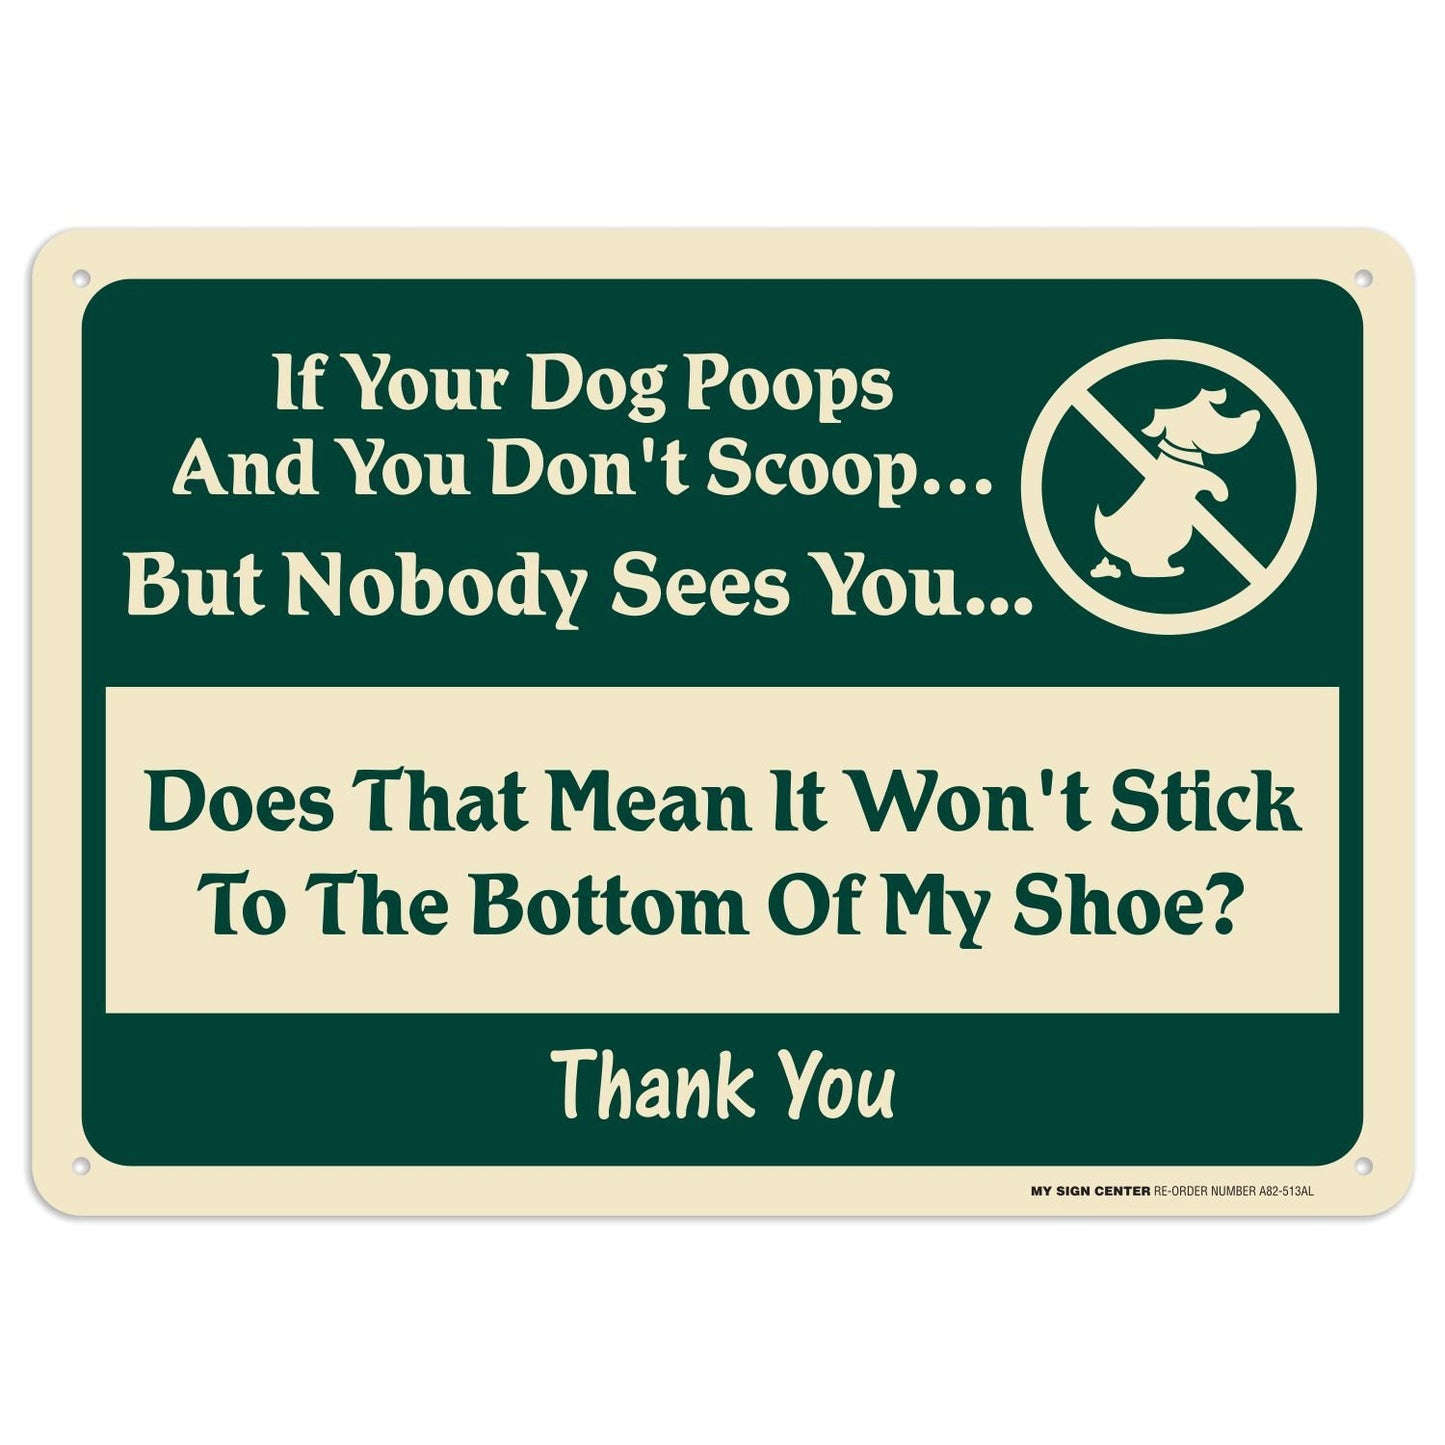 Pick Up After Your Dog Sign